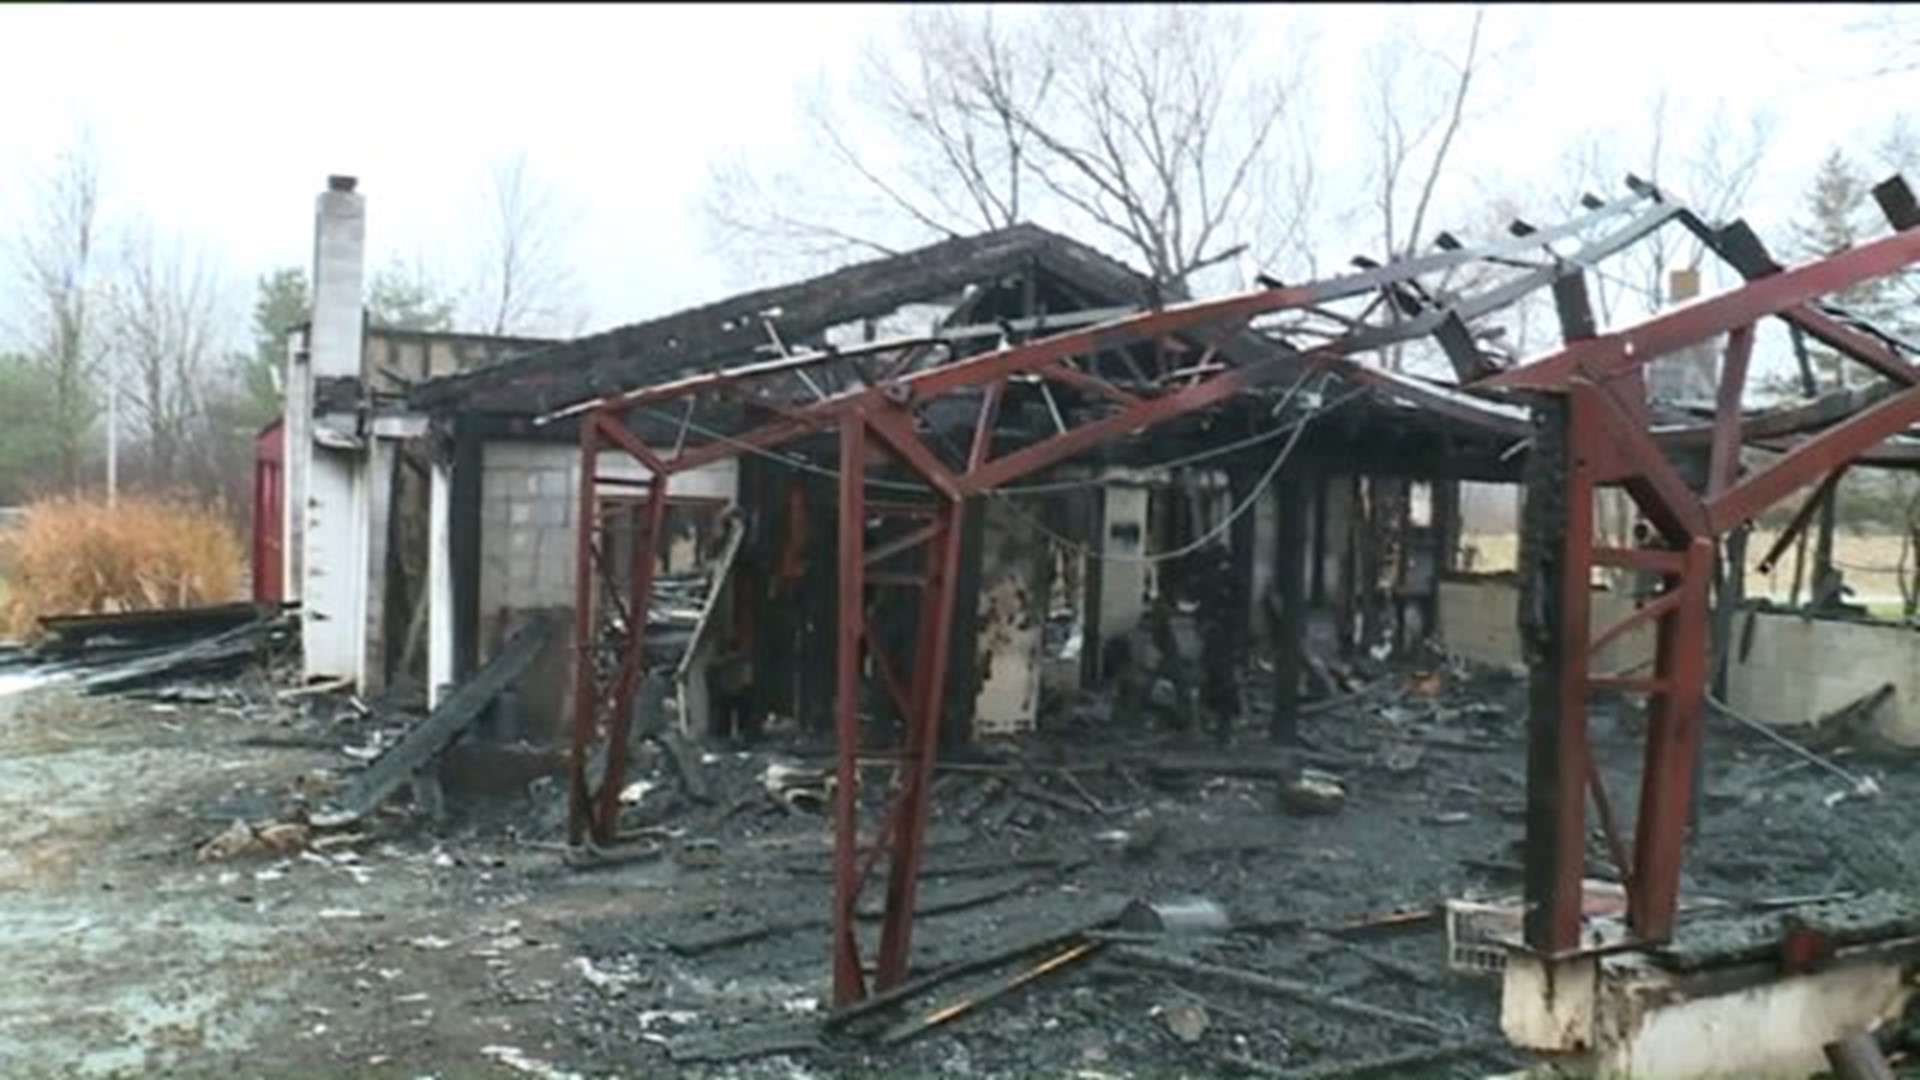 Fire Destroys Woodworking Shop in Carbon County